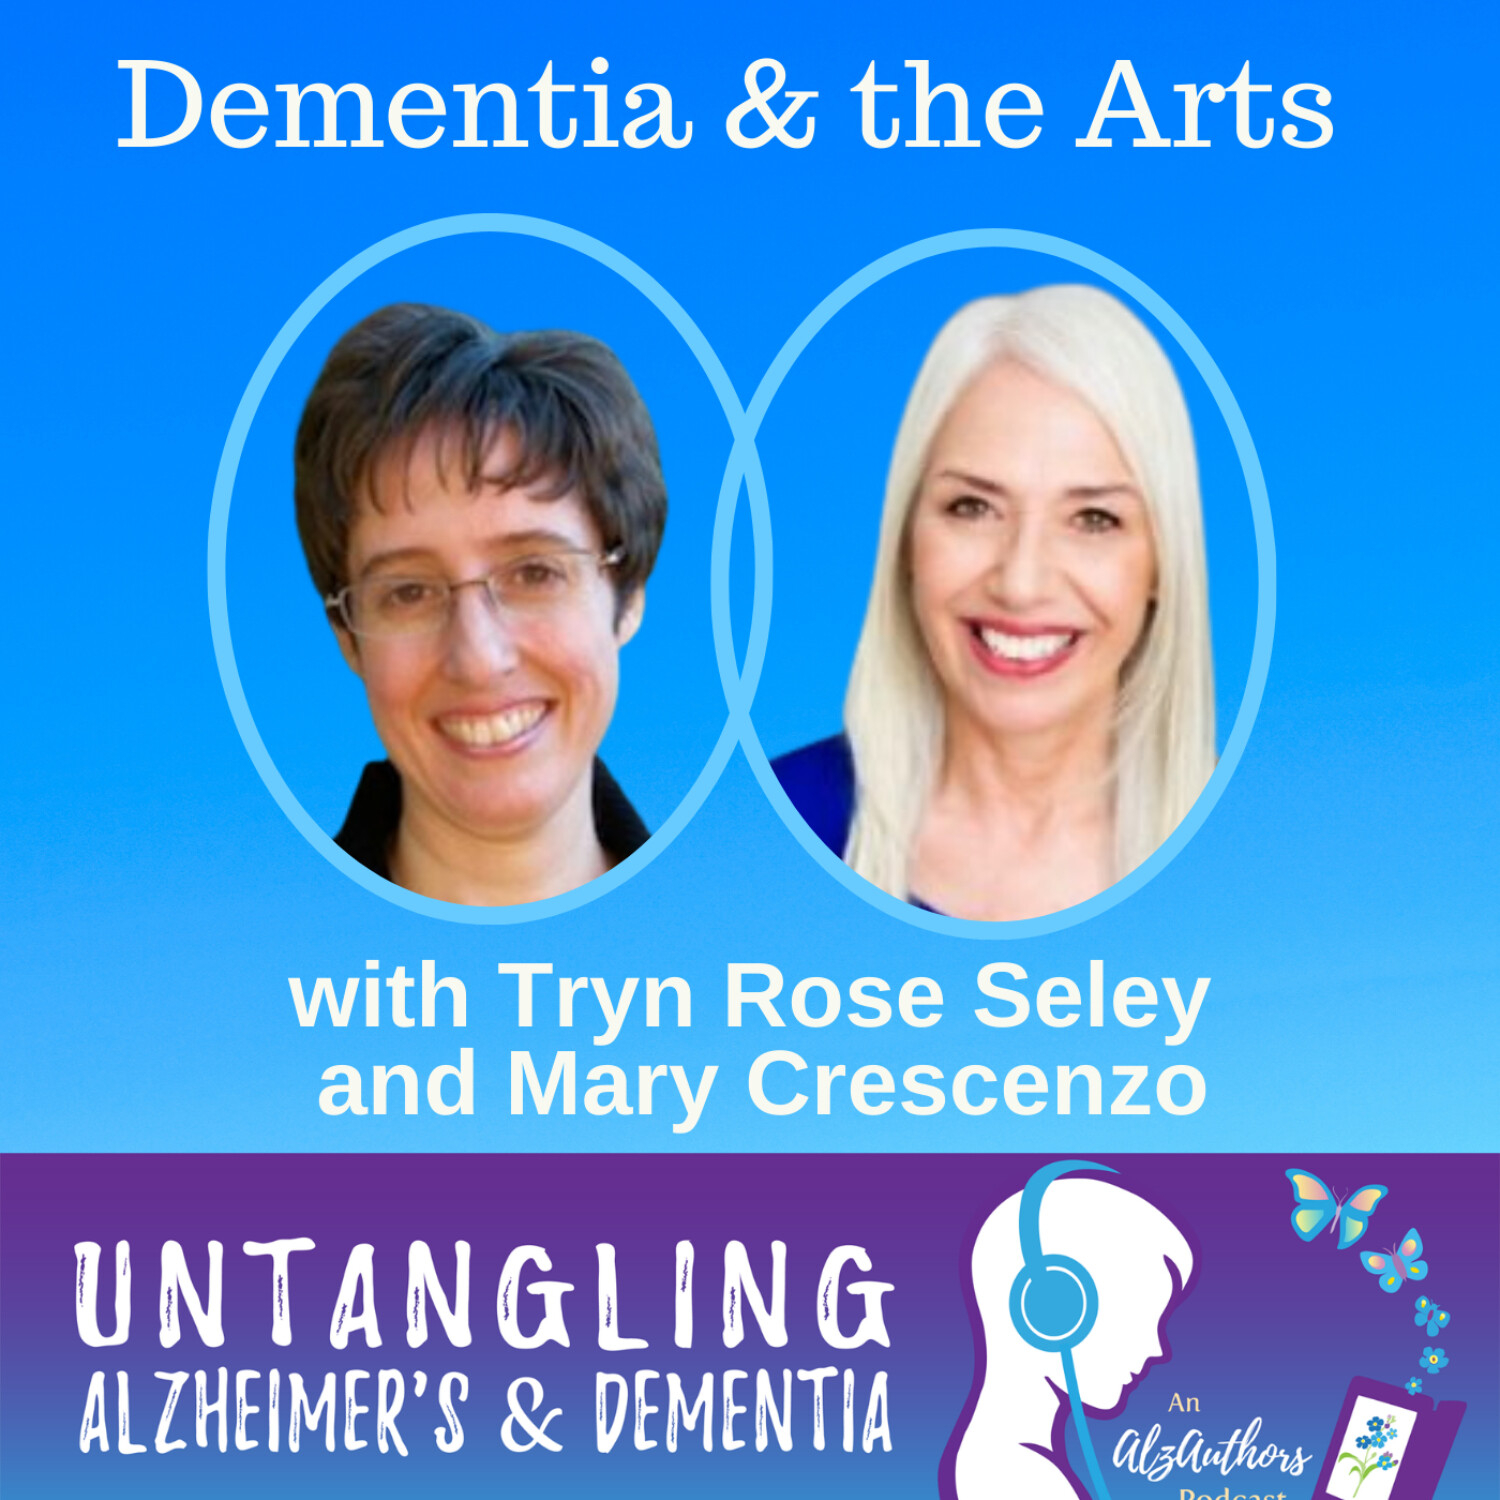 Tryn Rose Seley and Mary Crescenzo Untangle Dementia and the Arts